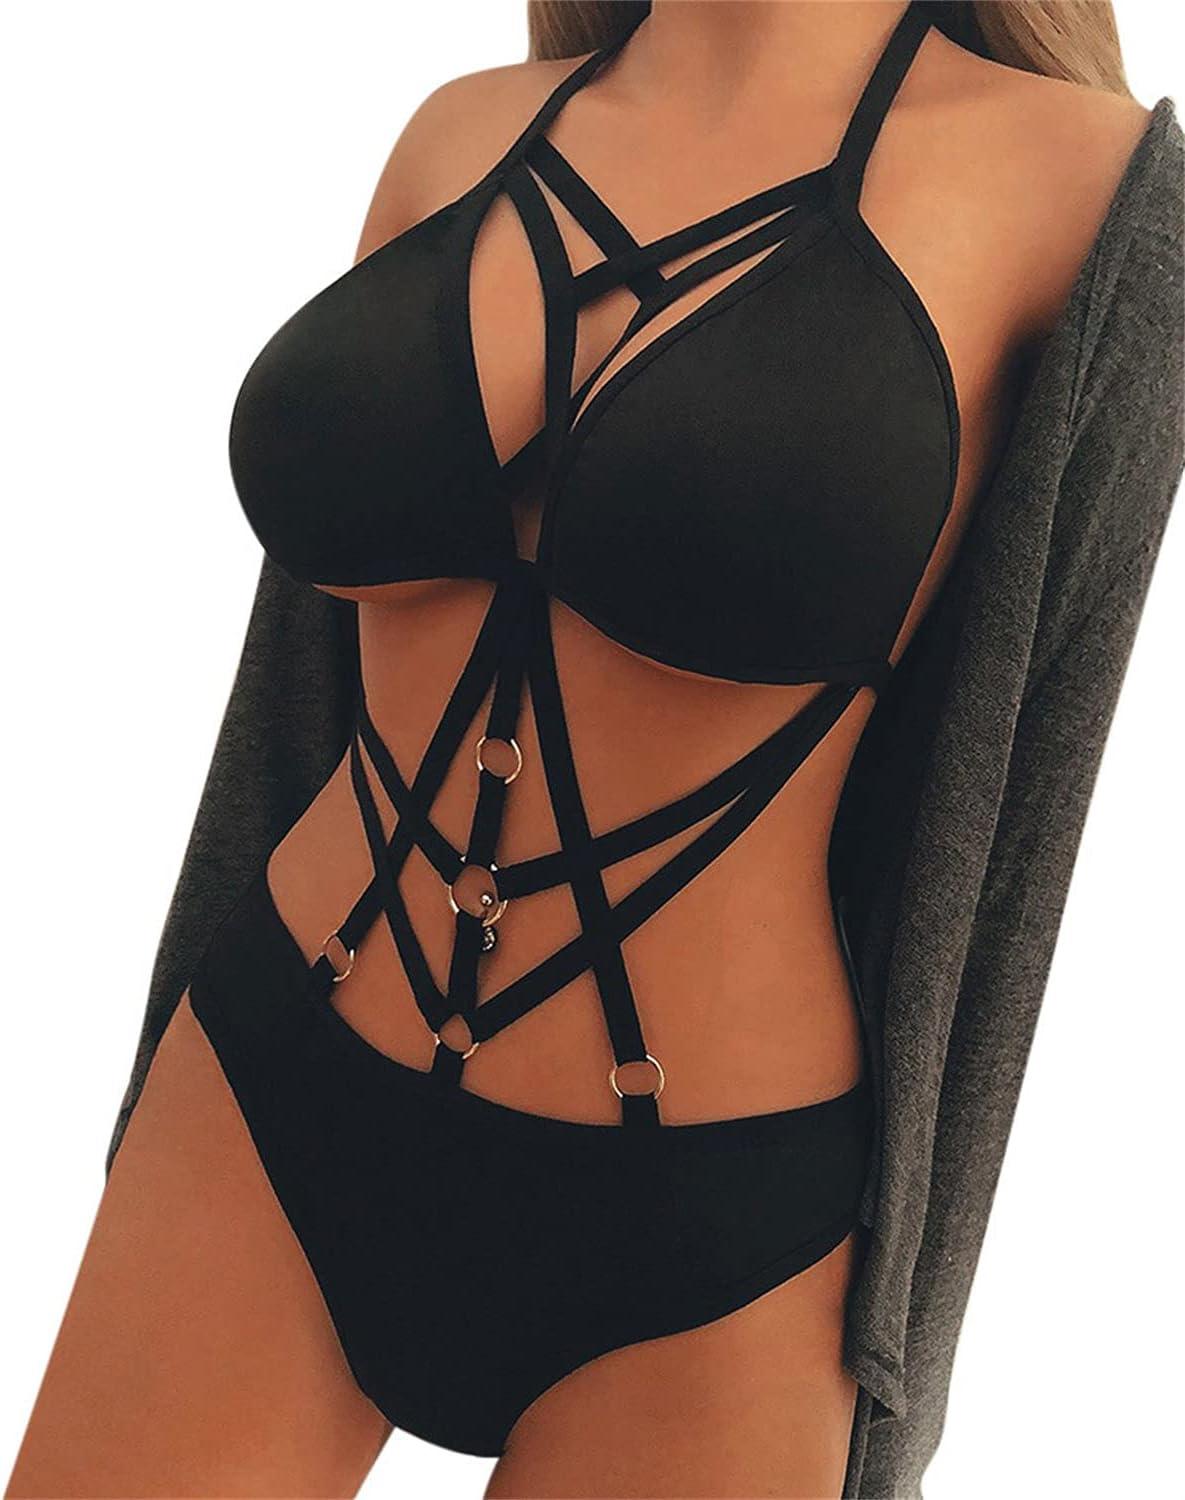 Women's Punk Body Harness Lingerie Sexy Hollow Out Teddy One Piece